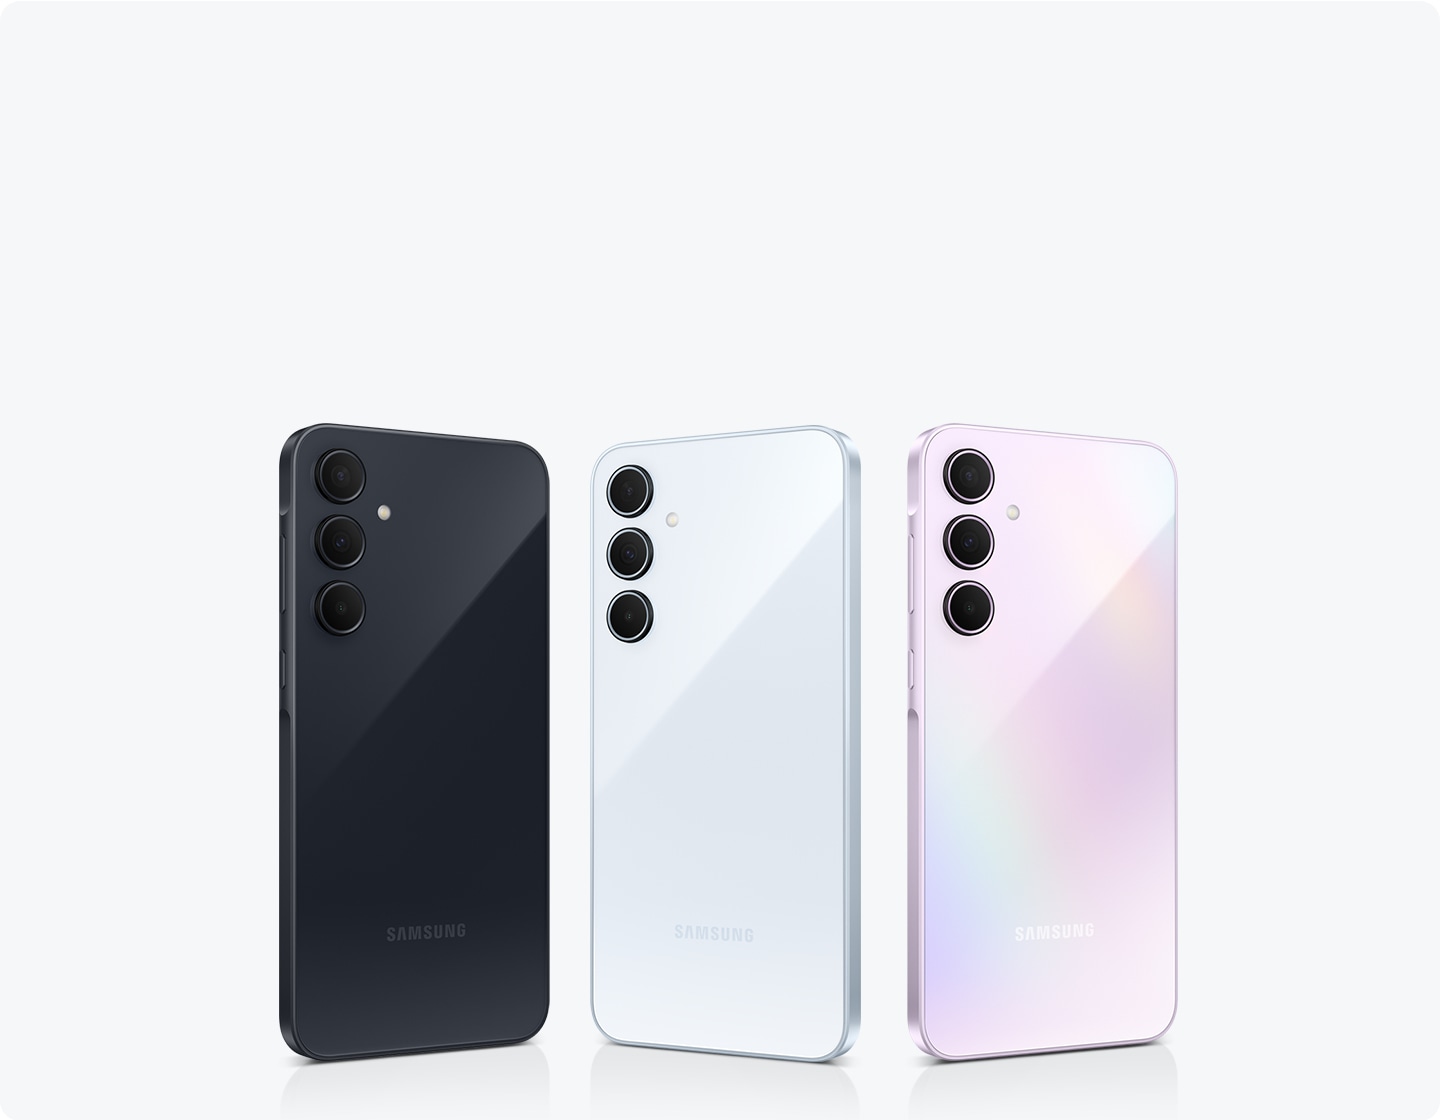 Four Samsung smartphones in a row with varying colors: Awesome Navy, Awesome Iceblue, Awesome Lilac, and Awesome Lemon. Each phone features a 3-camera layout on the back.